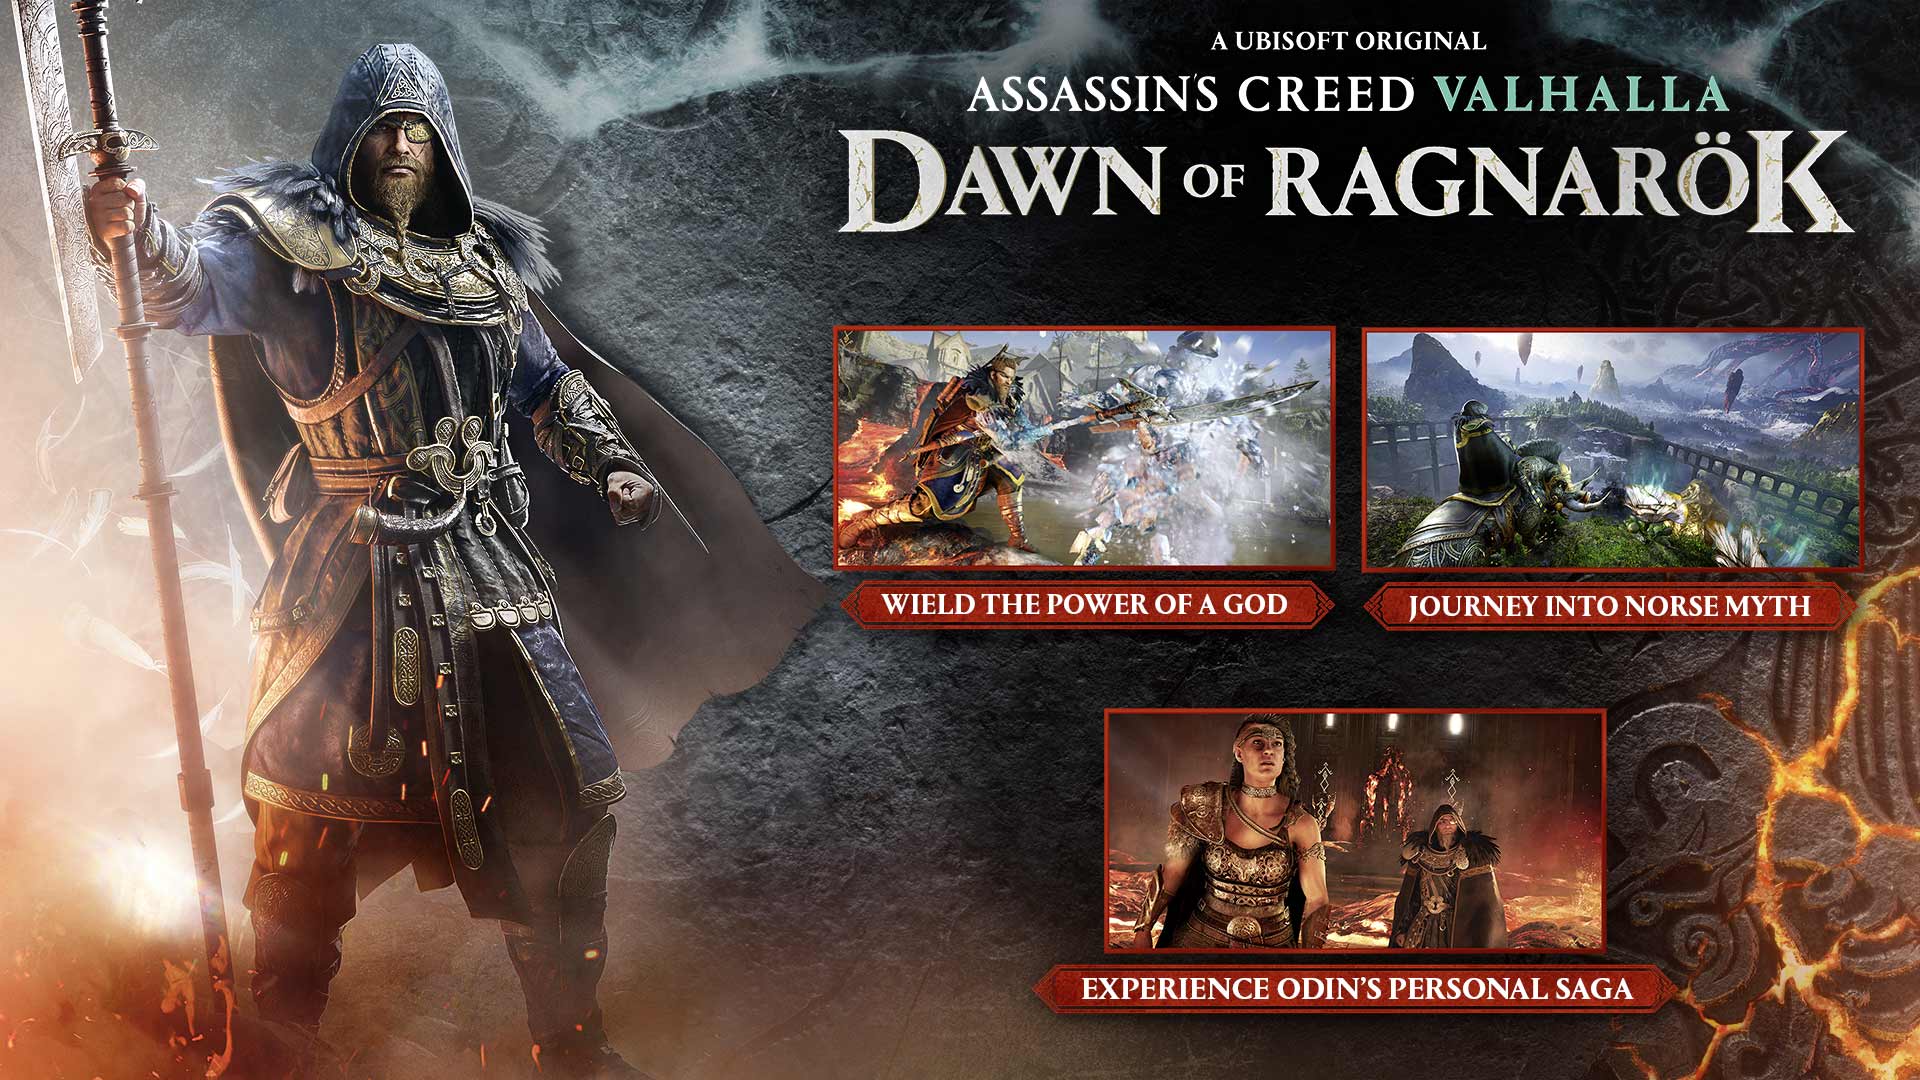 Dawn Of Ragnarok DLC Needed To Be Included In Assassin's Creed